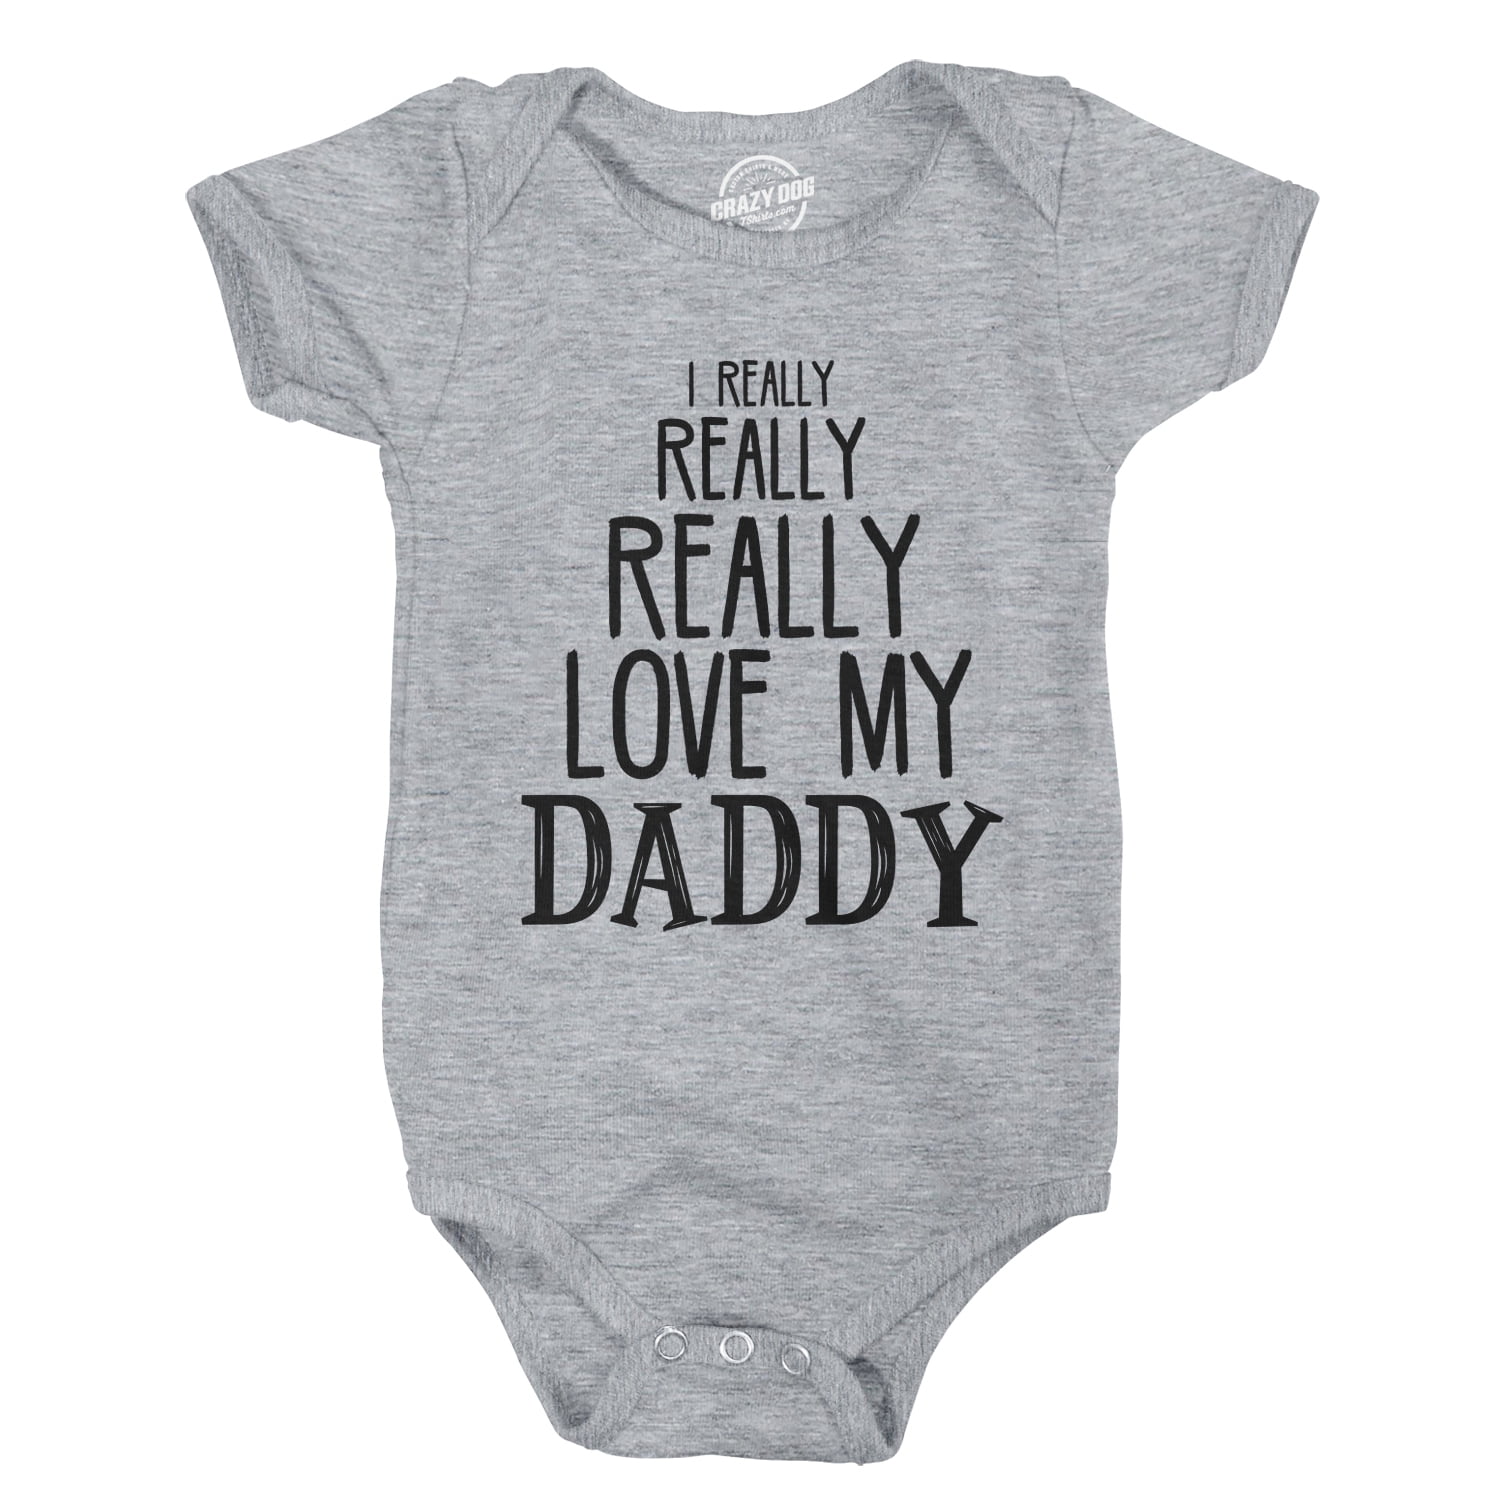 I'm Cute Just Like My Daddy Baby T-Shirt 